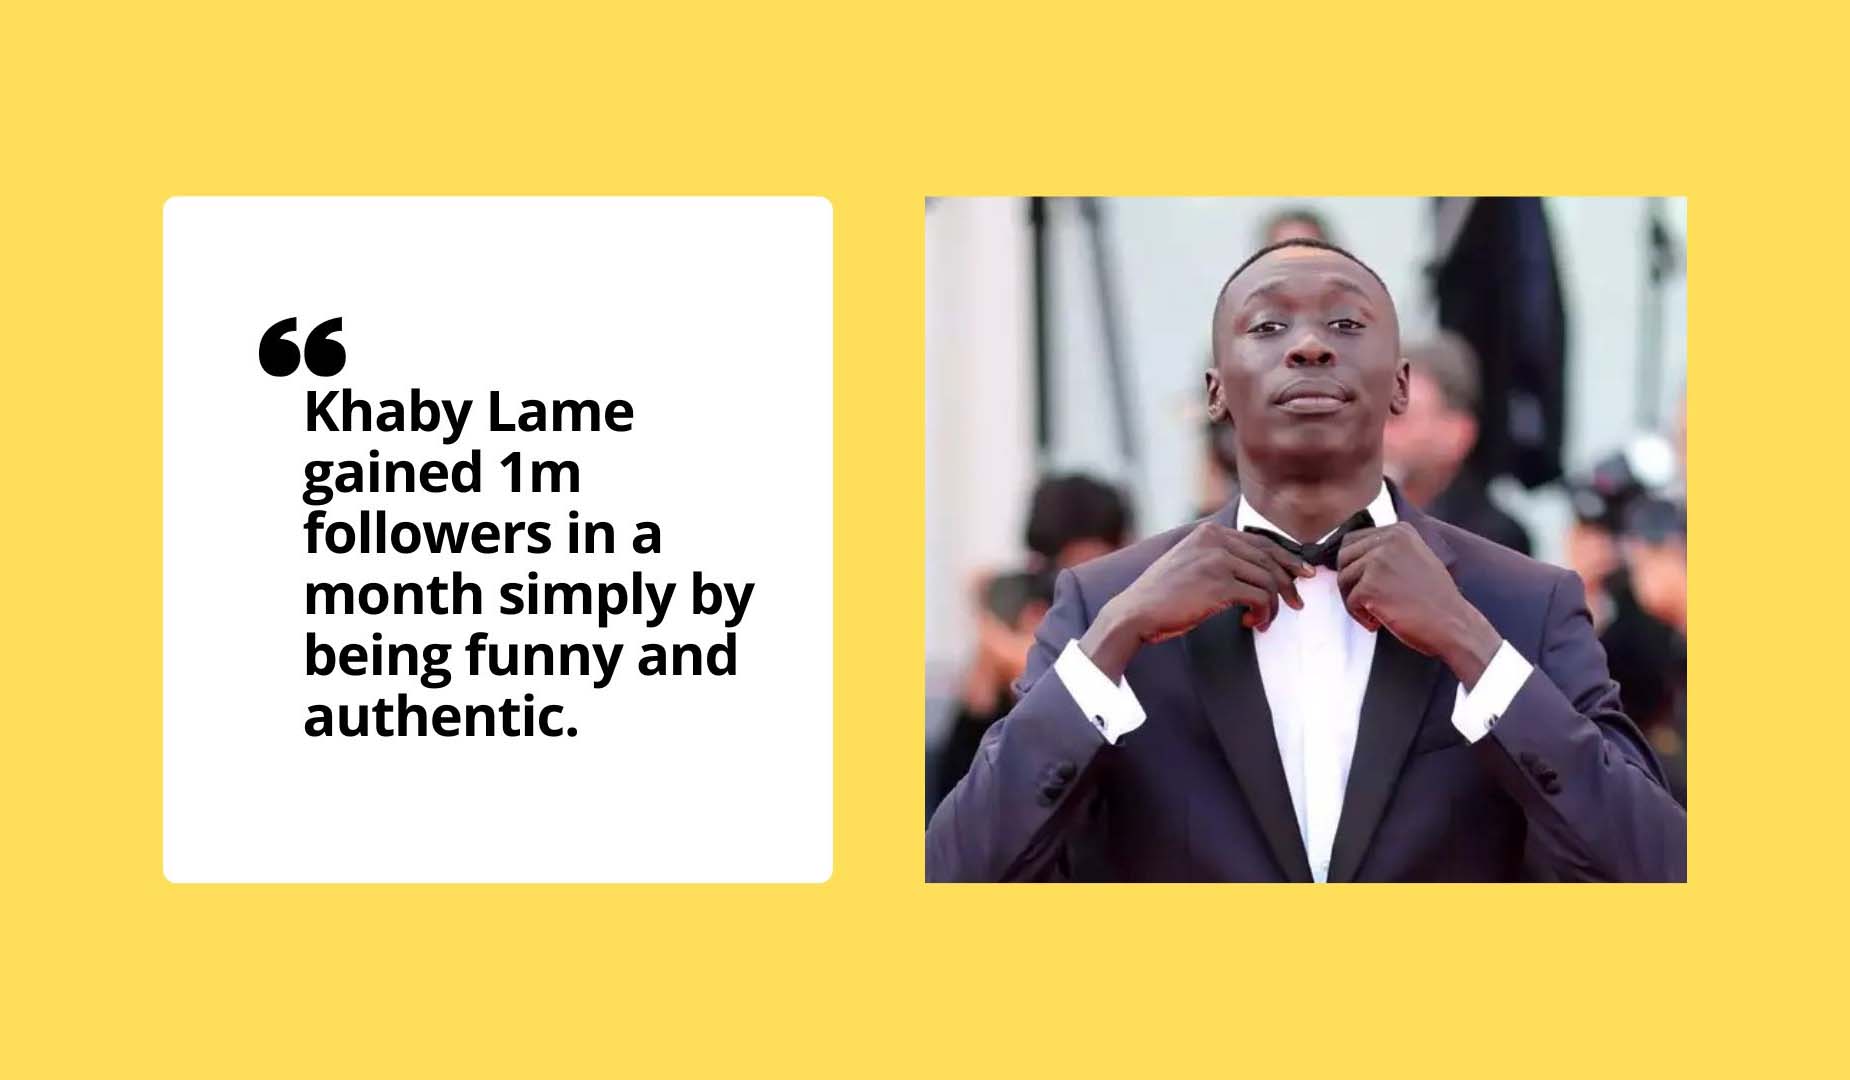 How Khaby Lame Gained 1M Followers in a Month